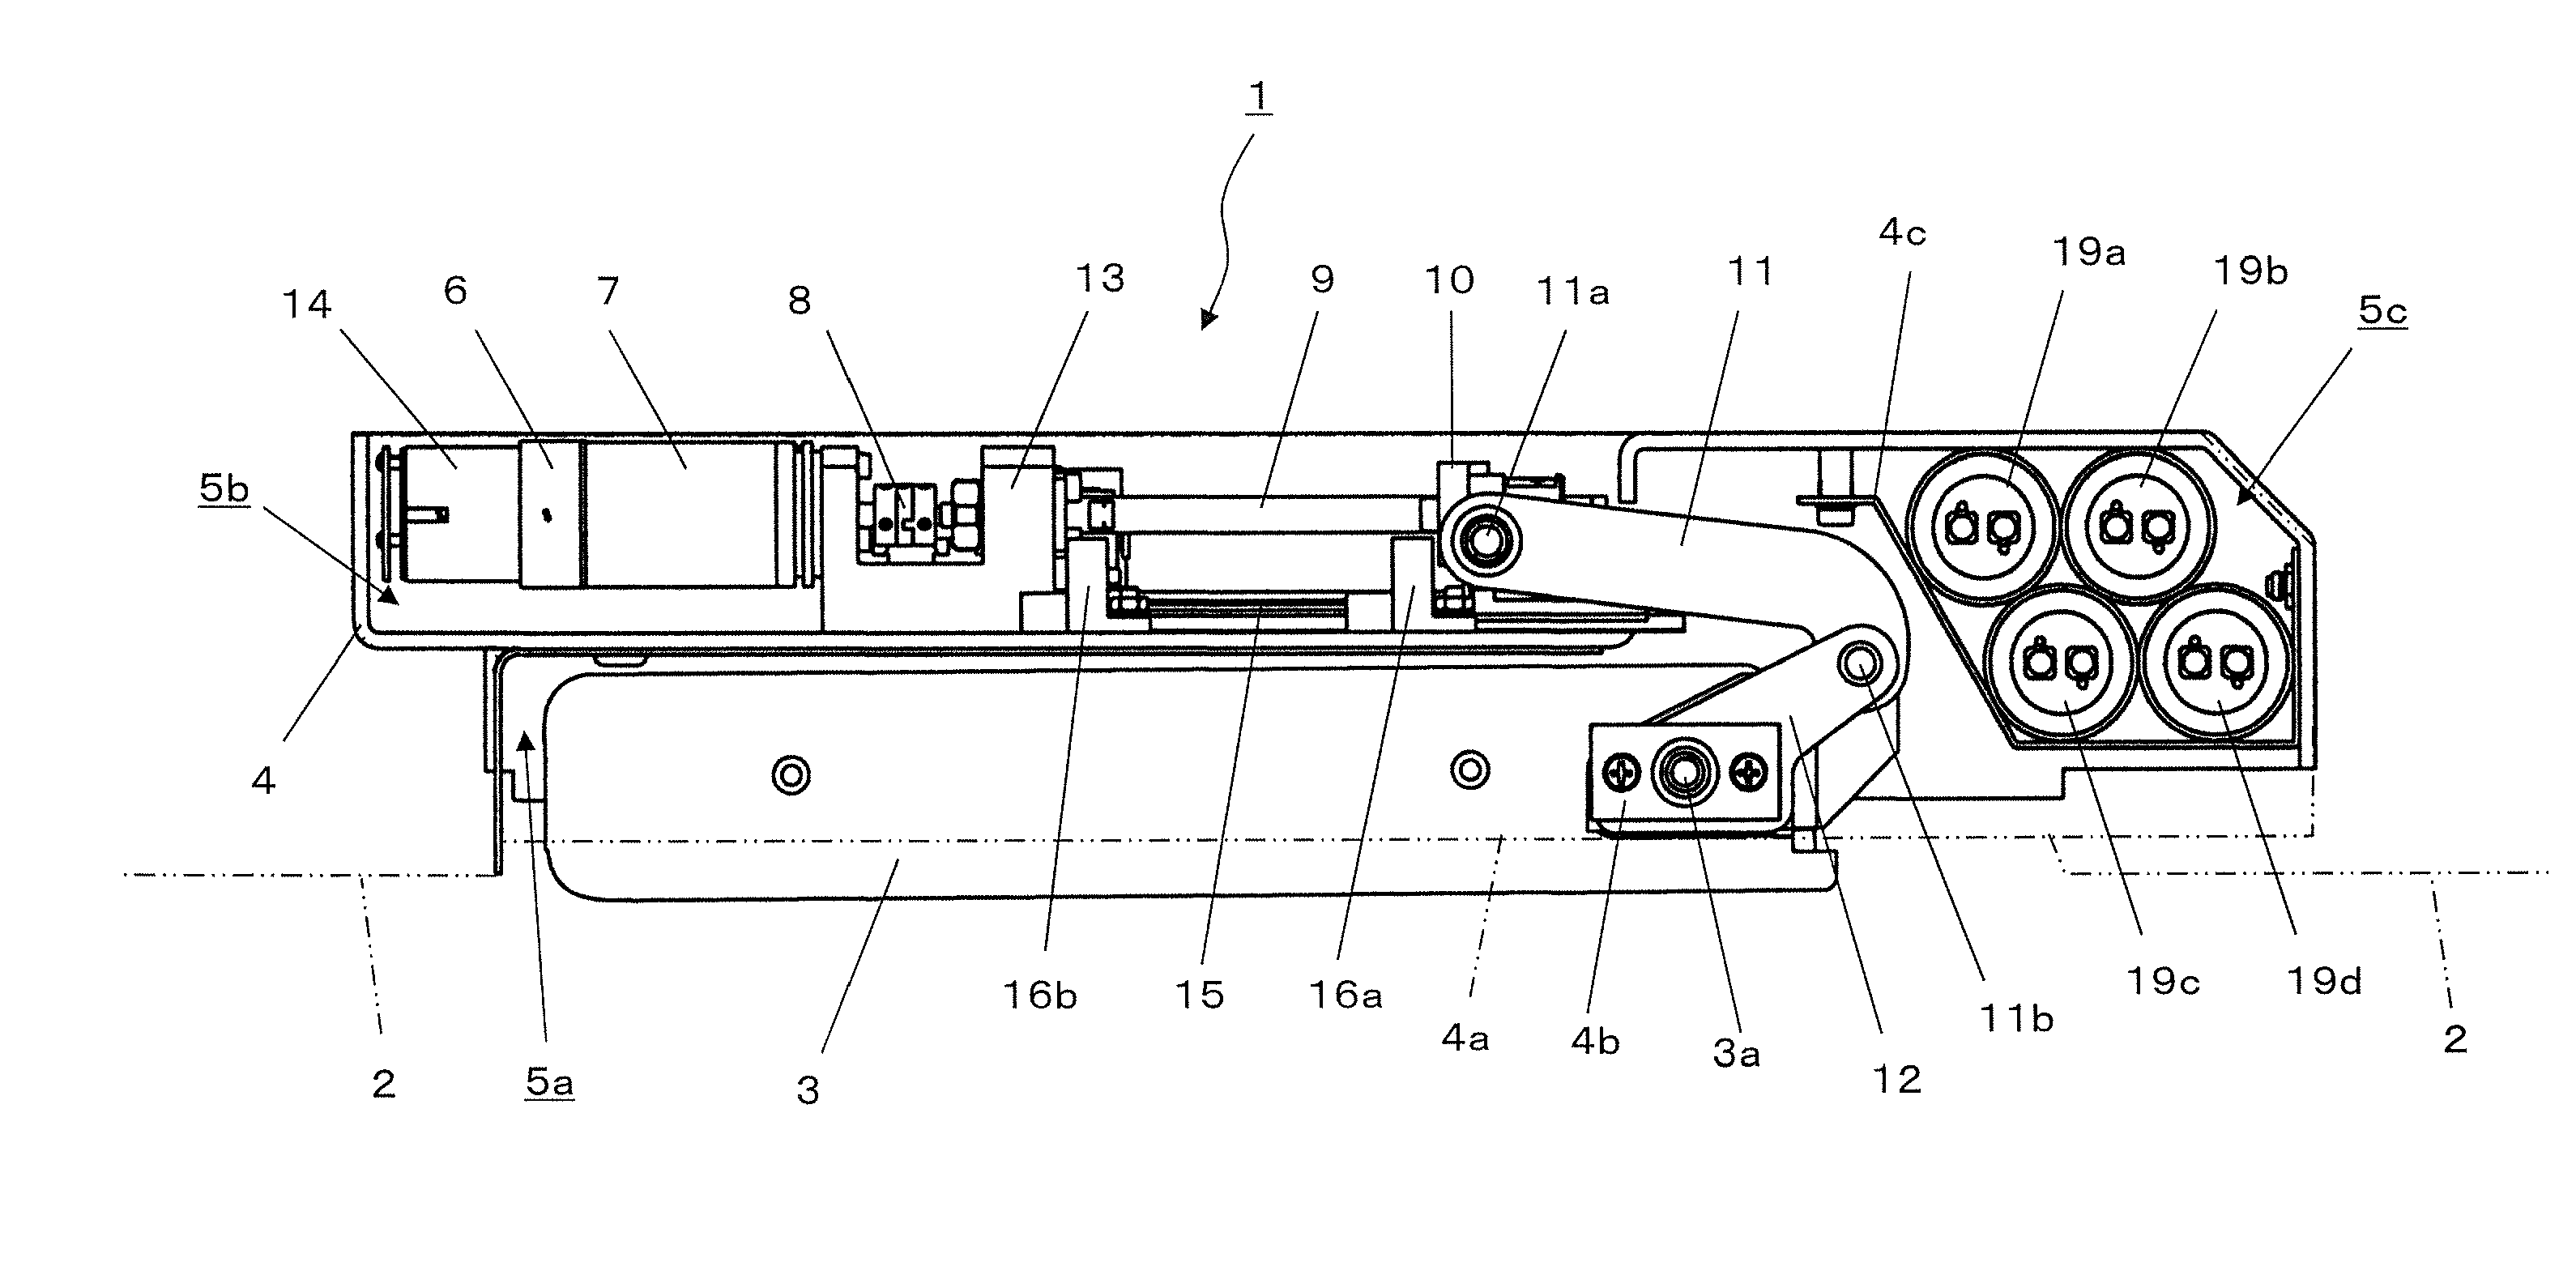 Pivoting display device used in aircraft